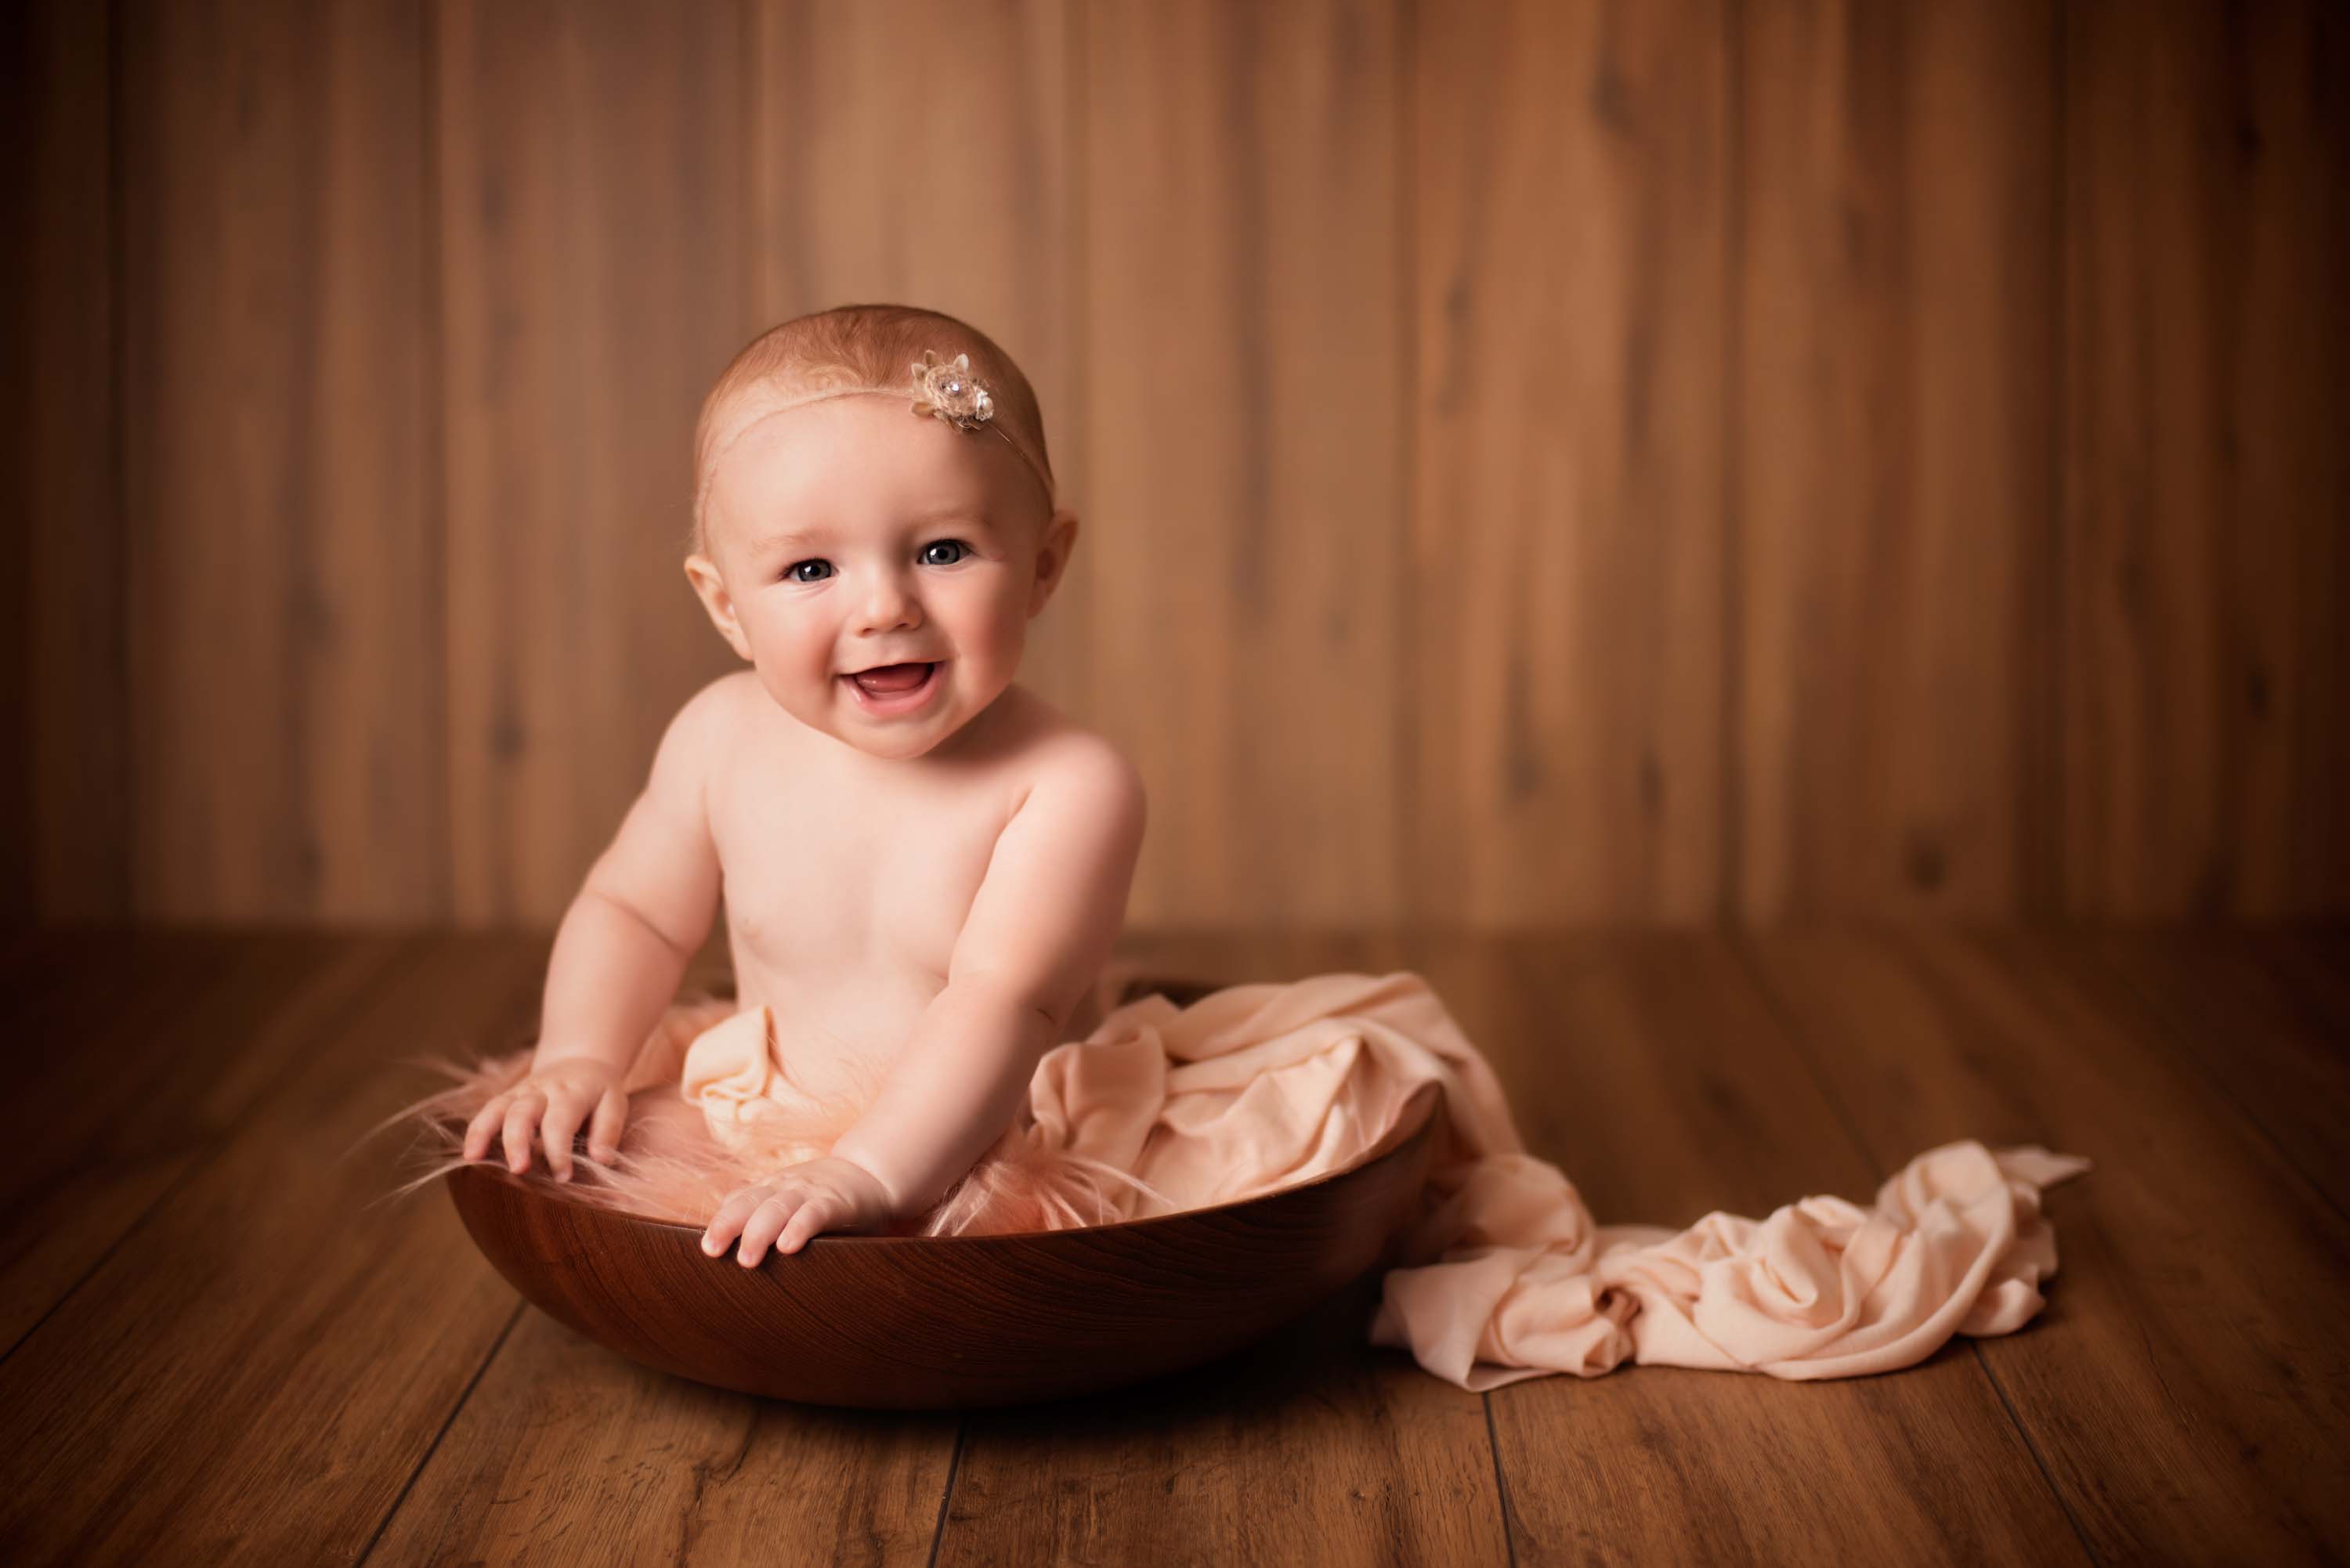 Little girl sitting in bowl and smiling at the photographer